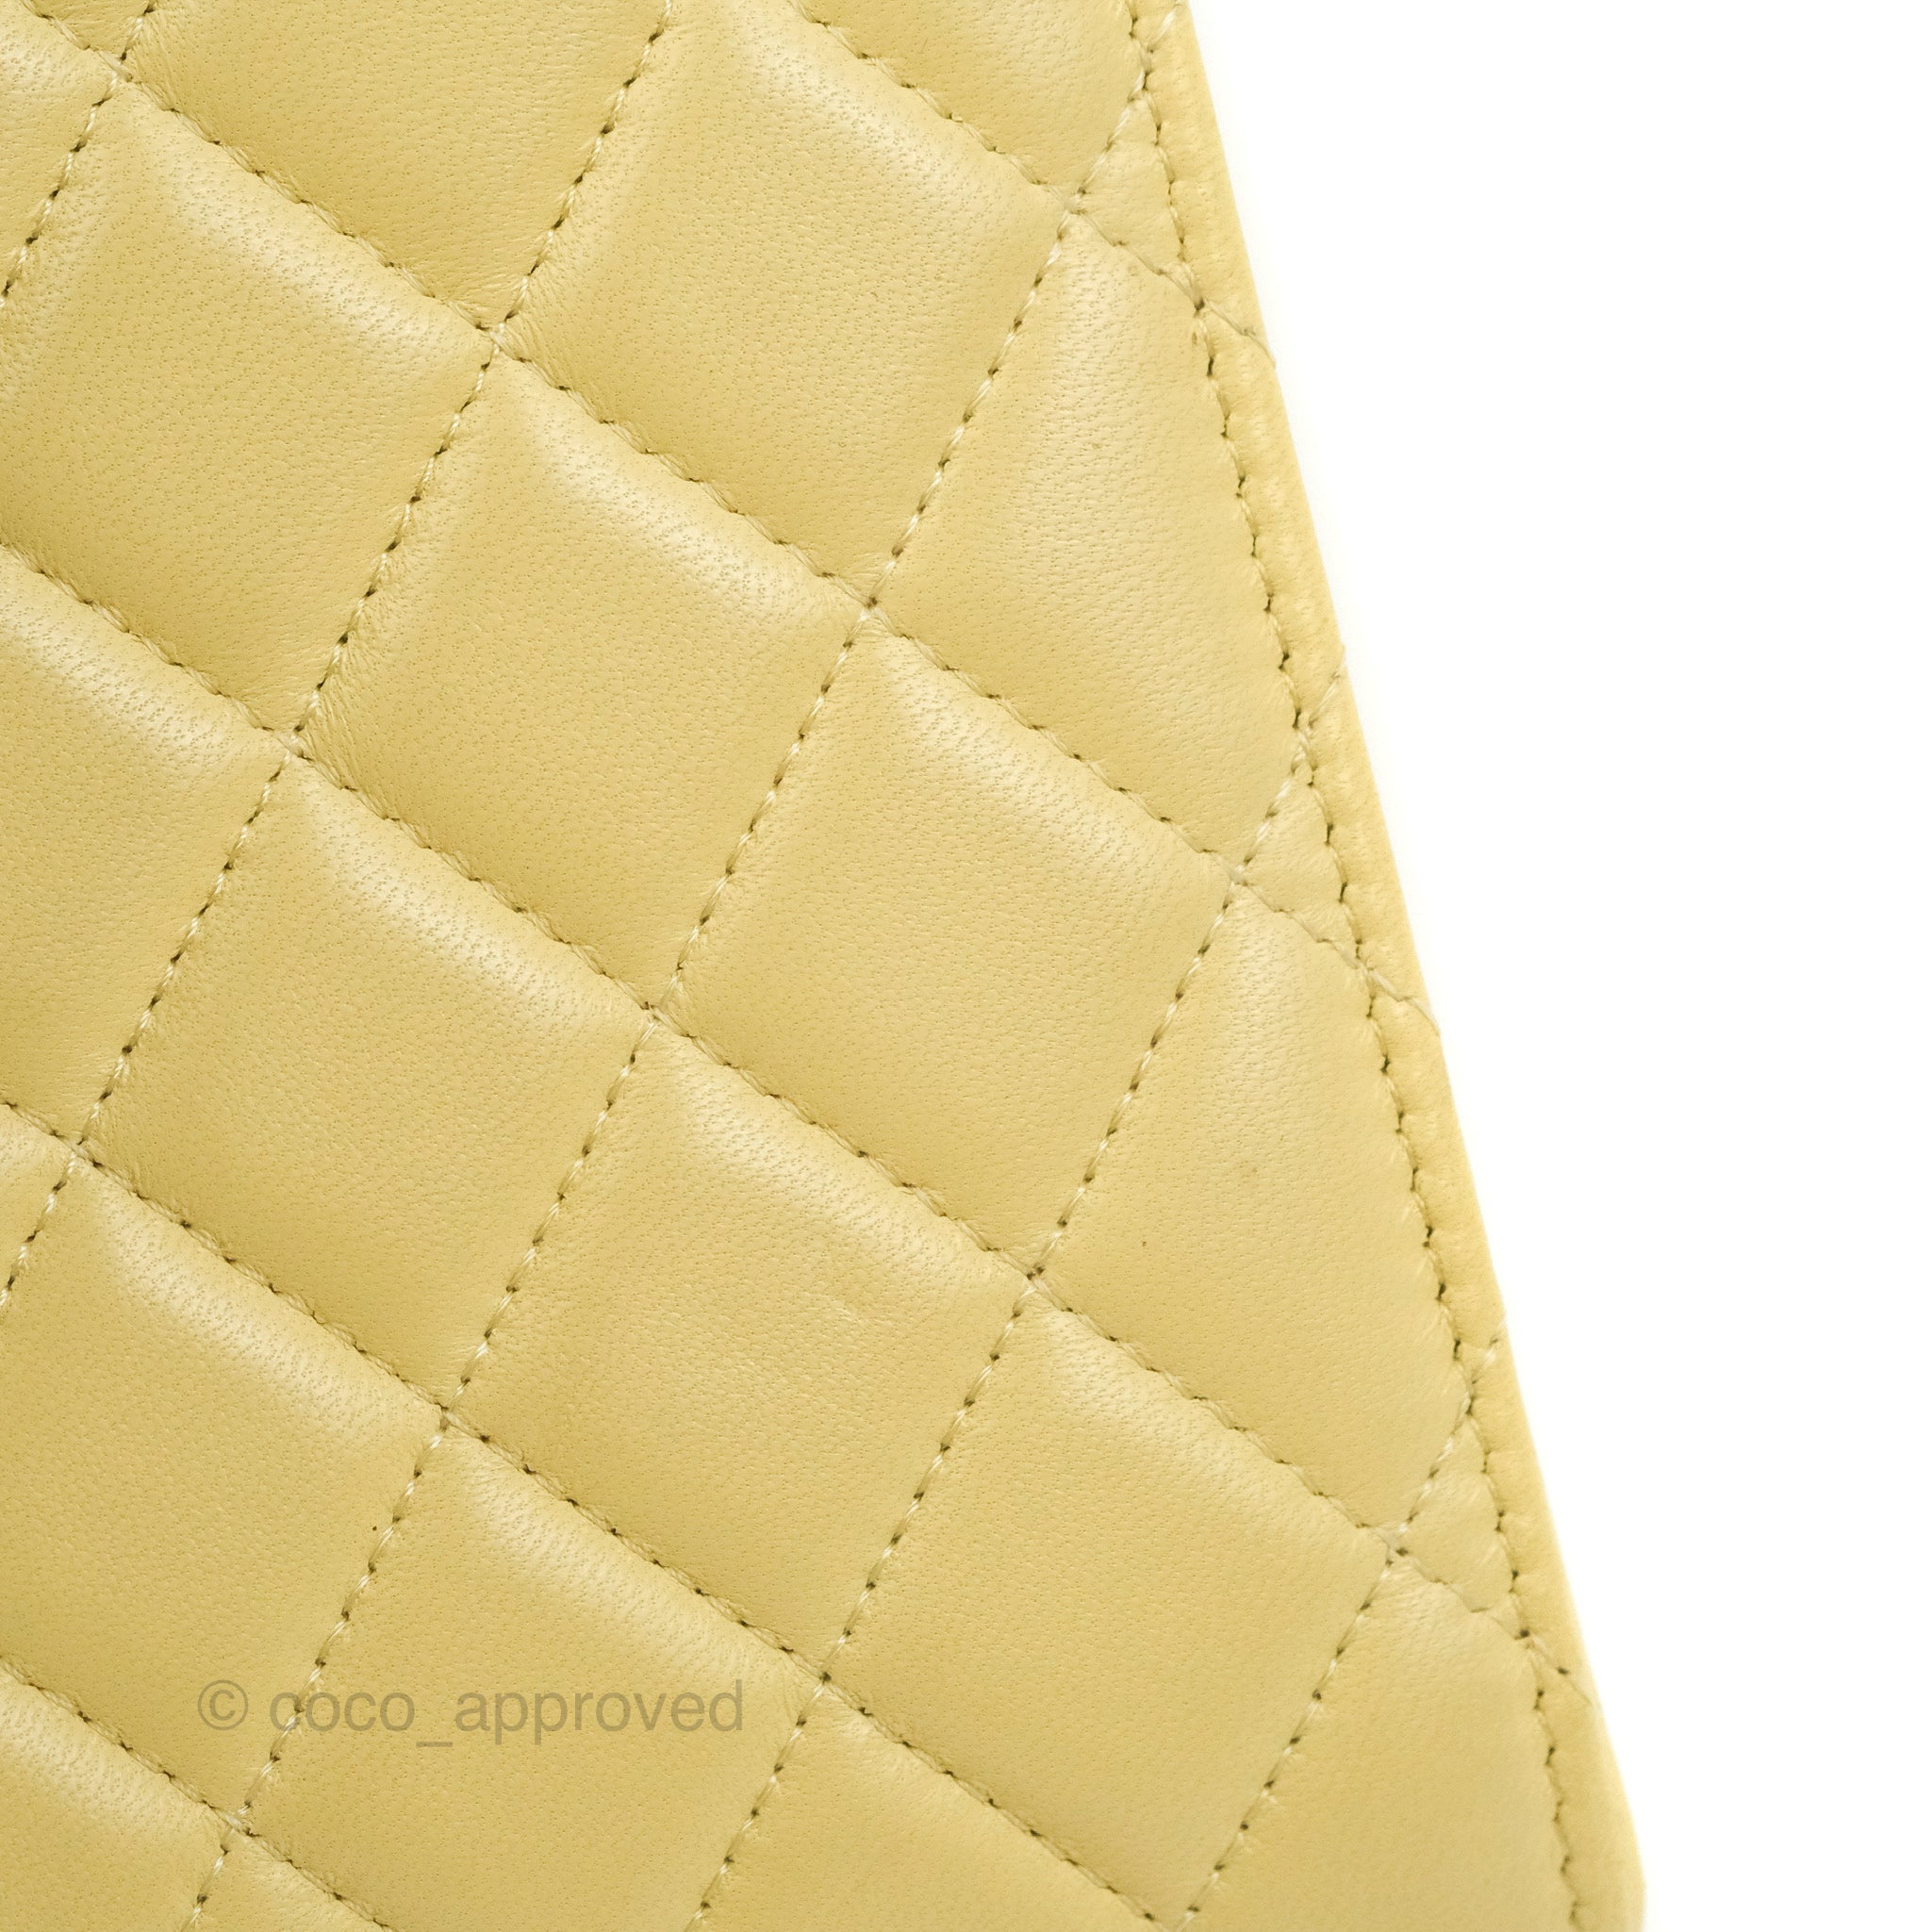 chanel wallet yellow